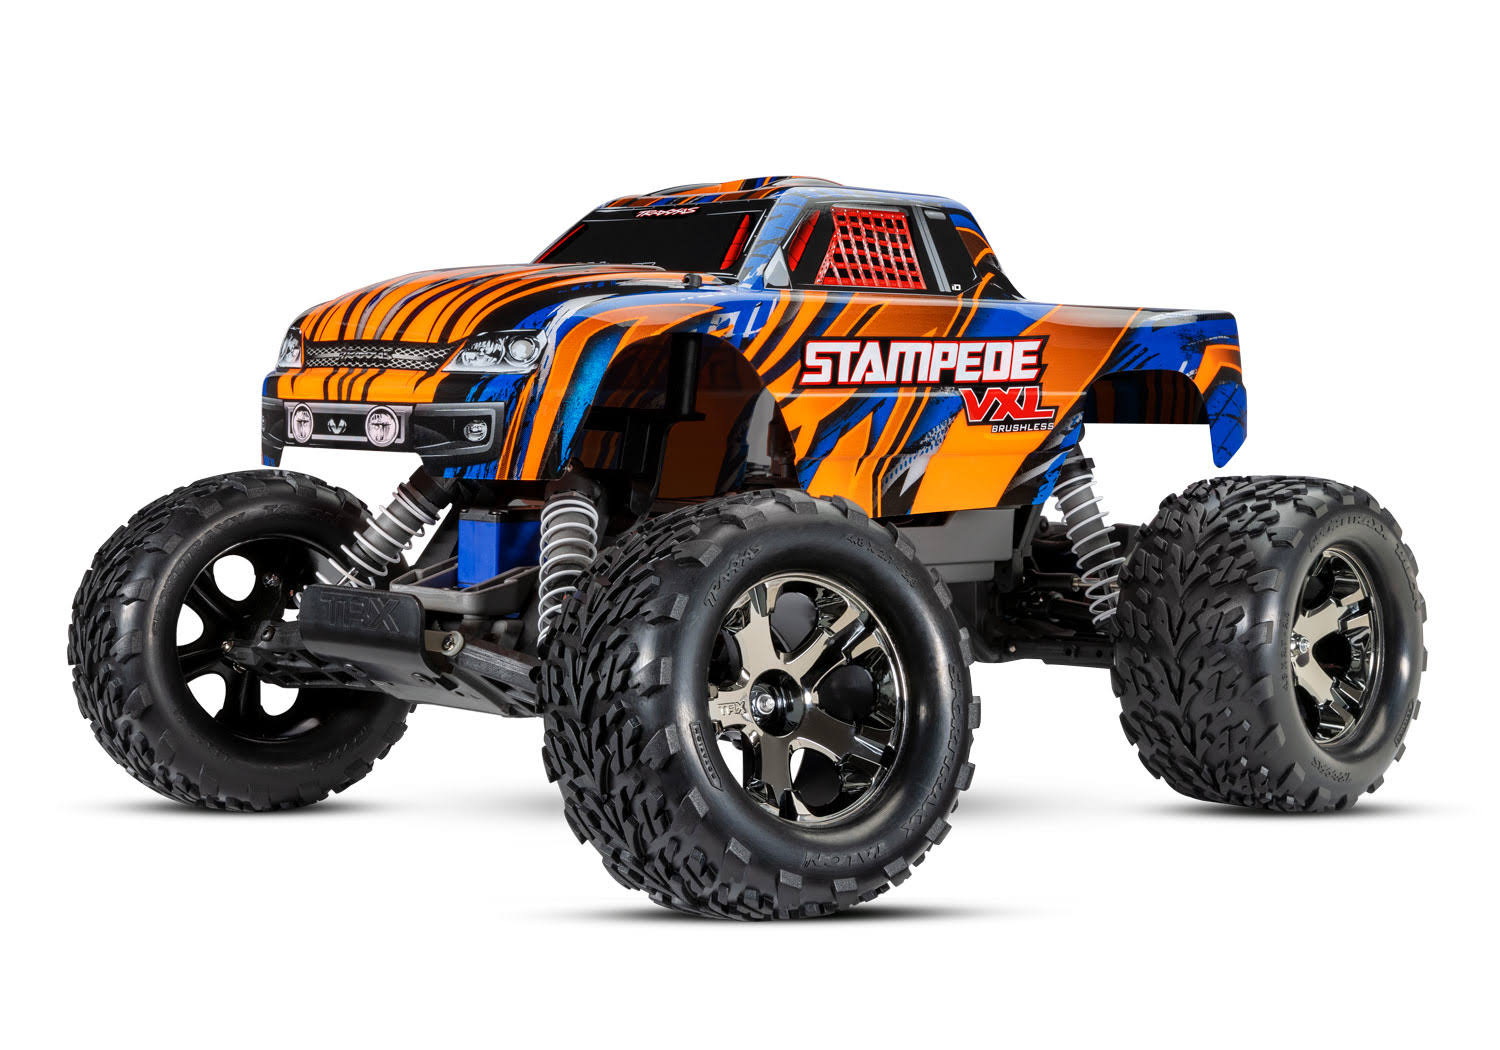 Traxxas Monster Truck Stampede Vxl Orange bl 2.4ghz Tsm Without Battery/charger